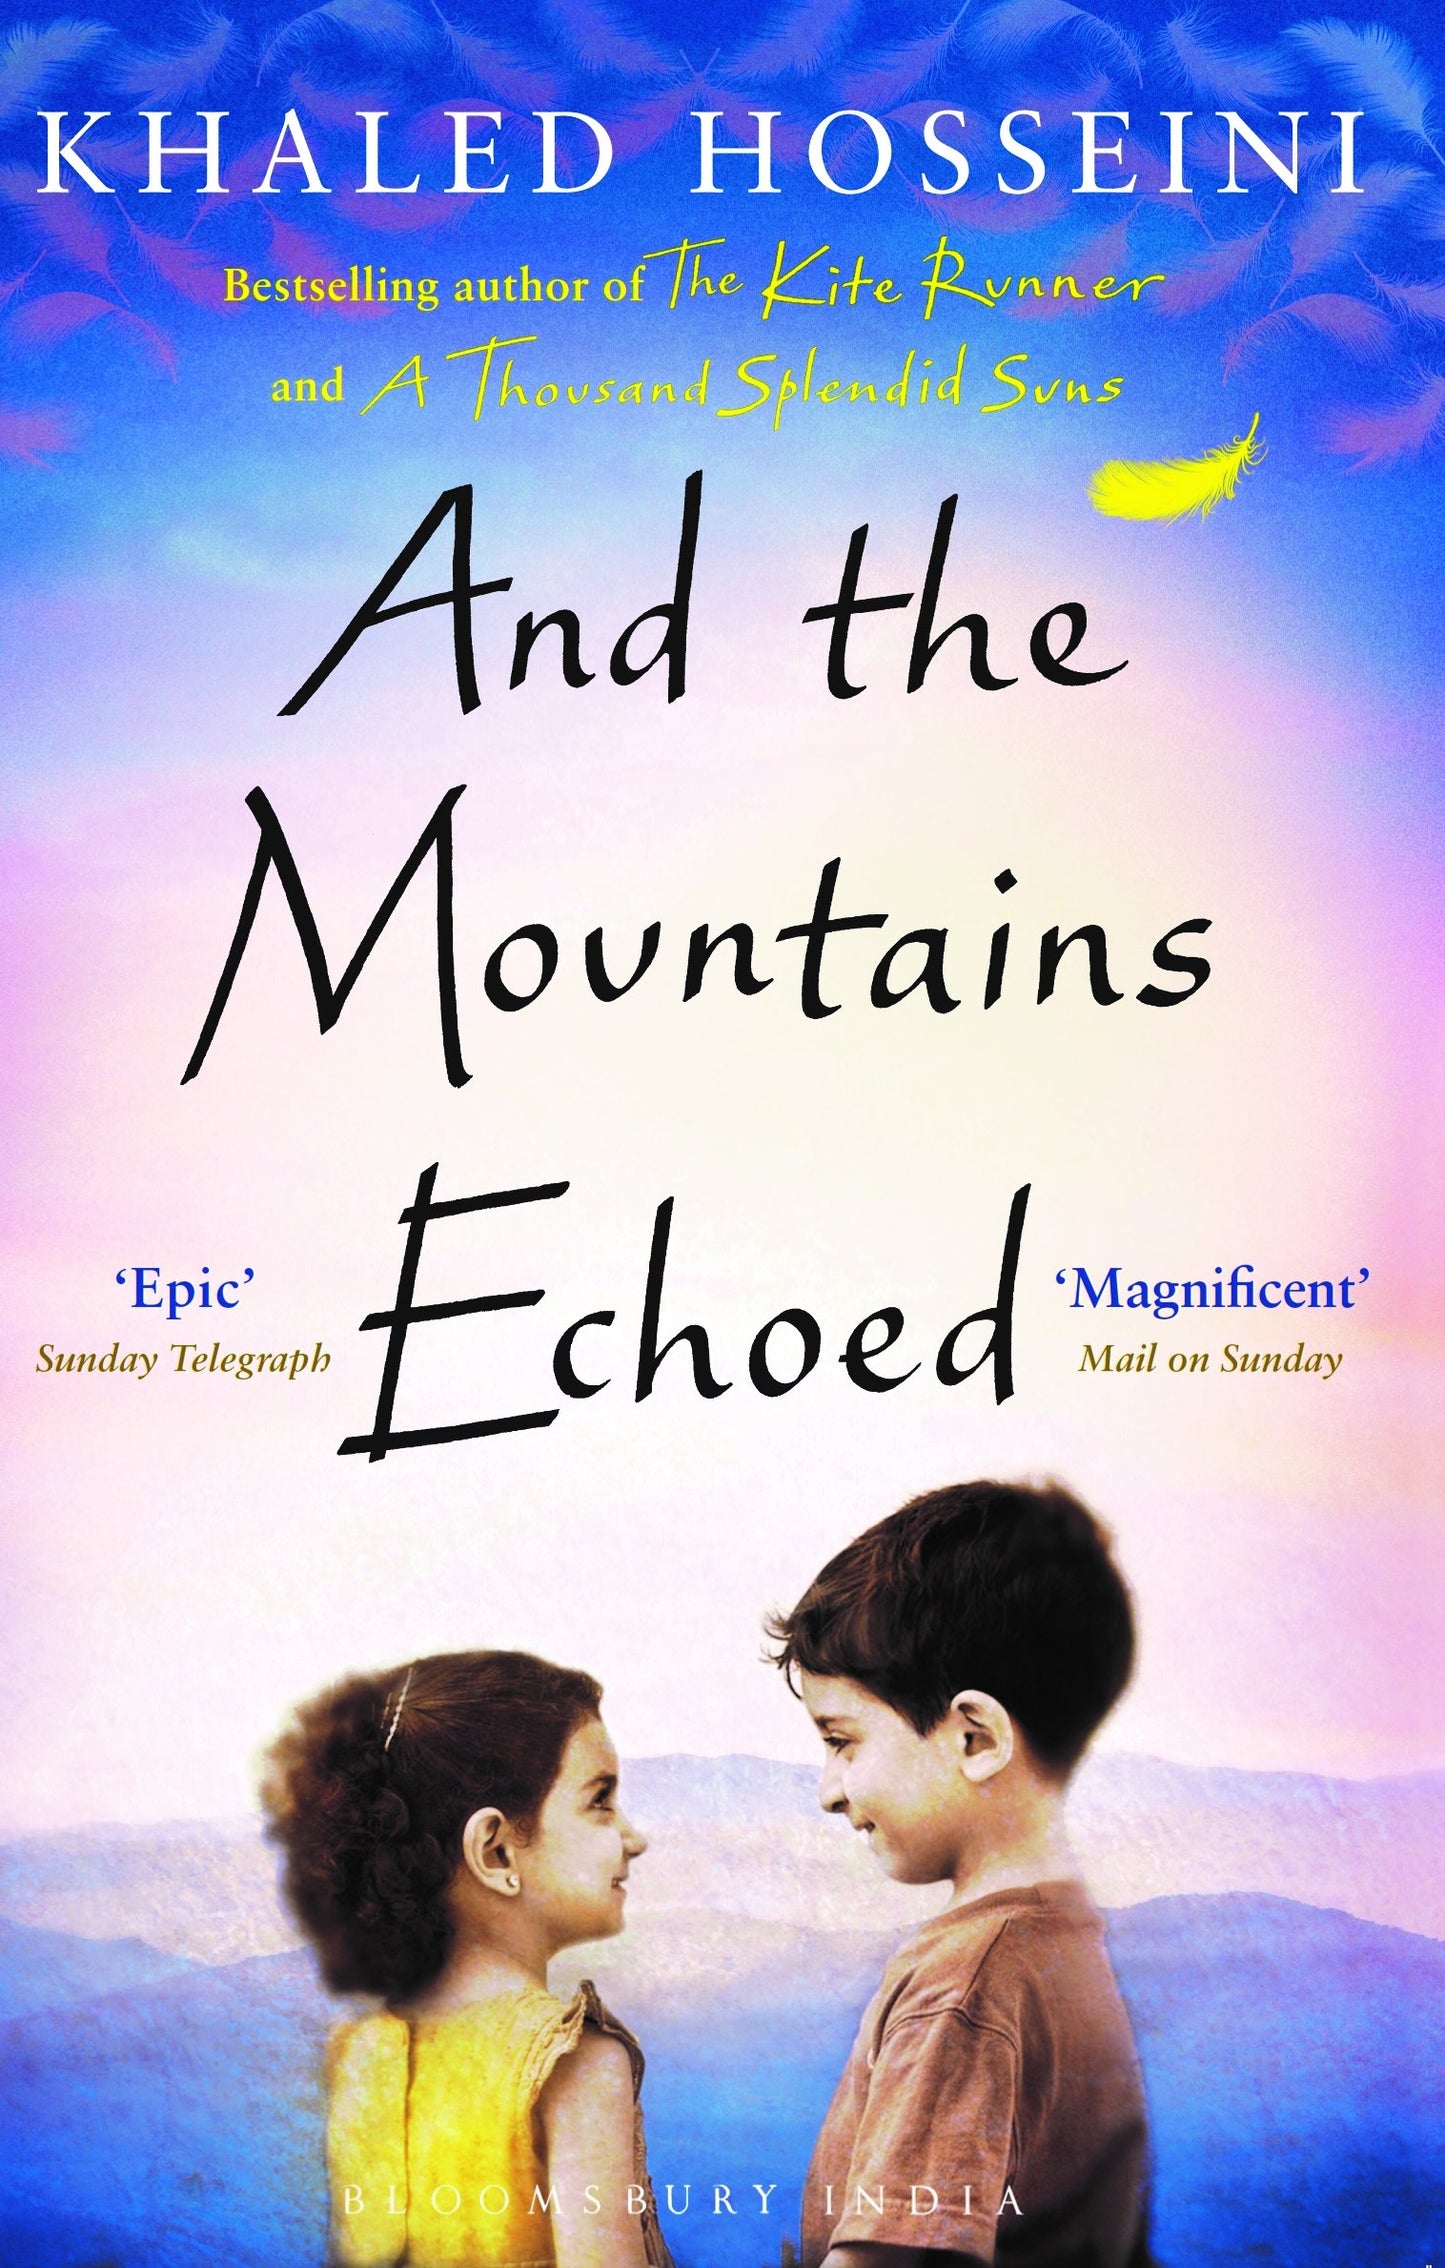 AND THE MOUNTAINS ECHOED by KHALED HOSSEINI